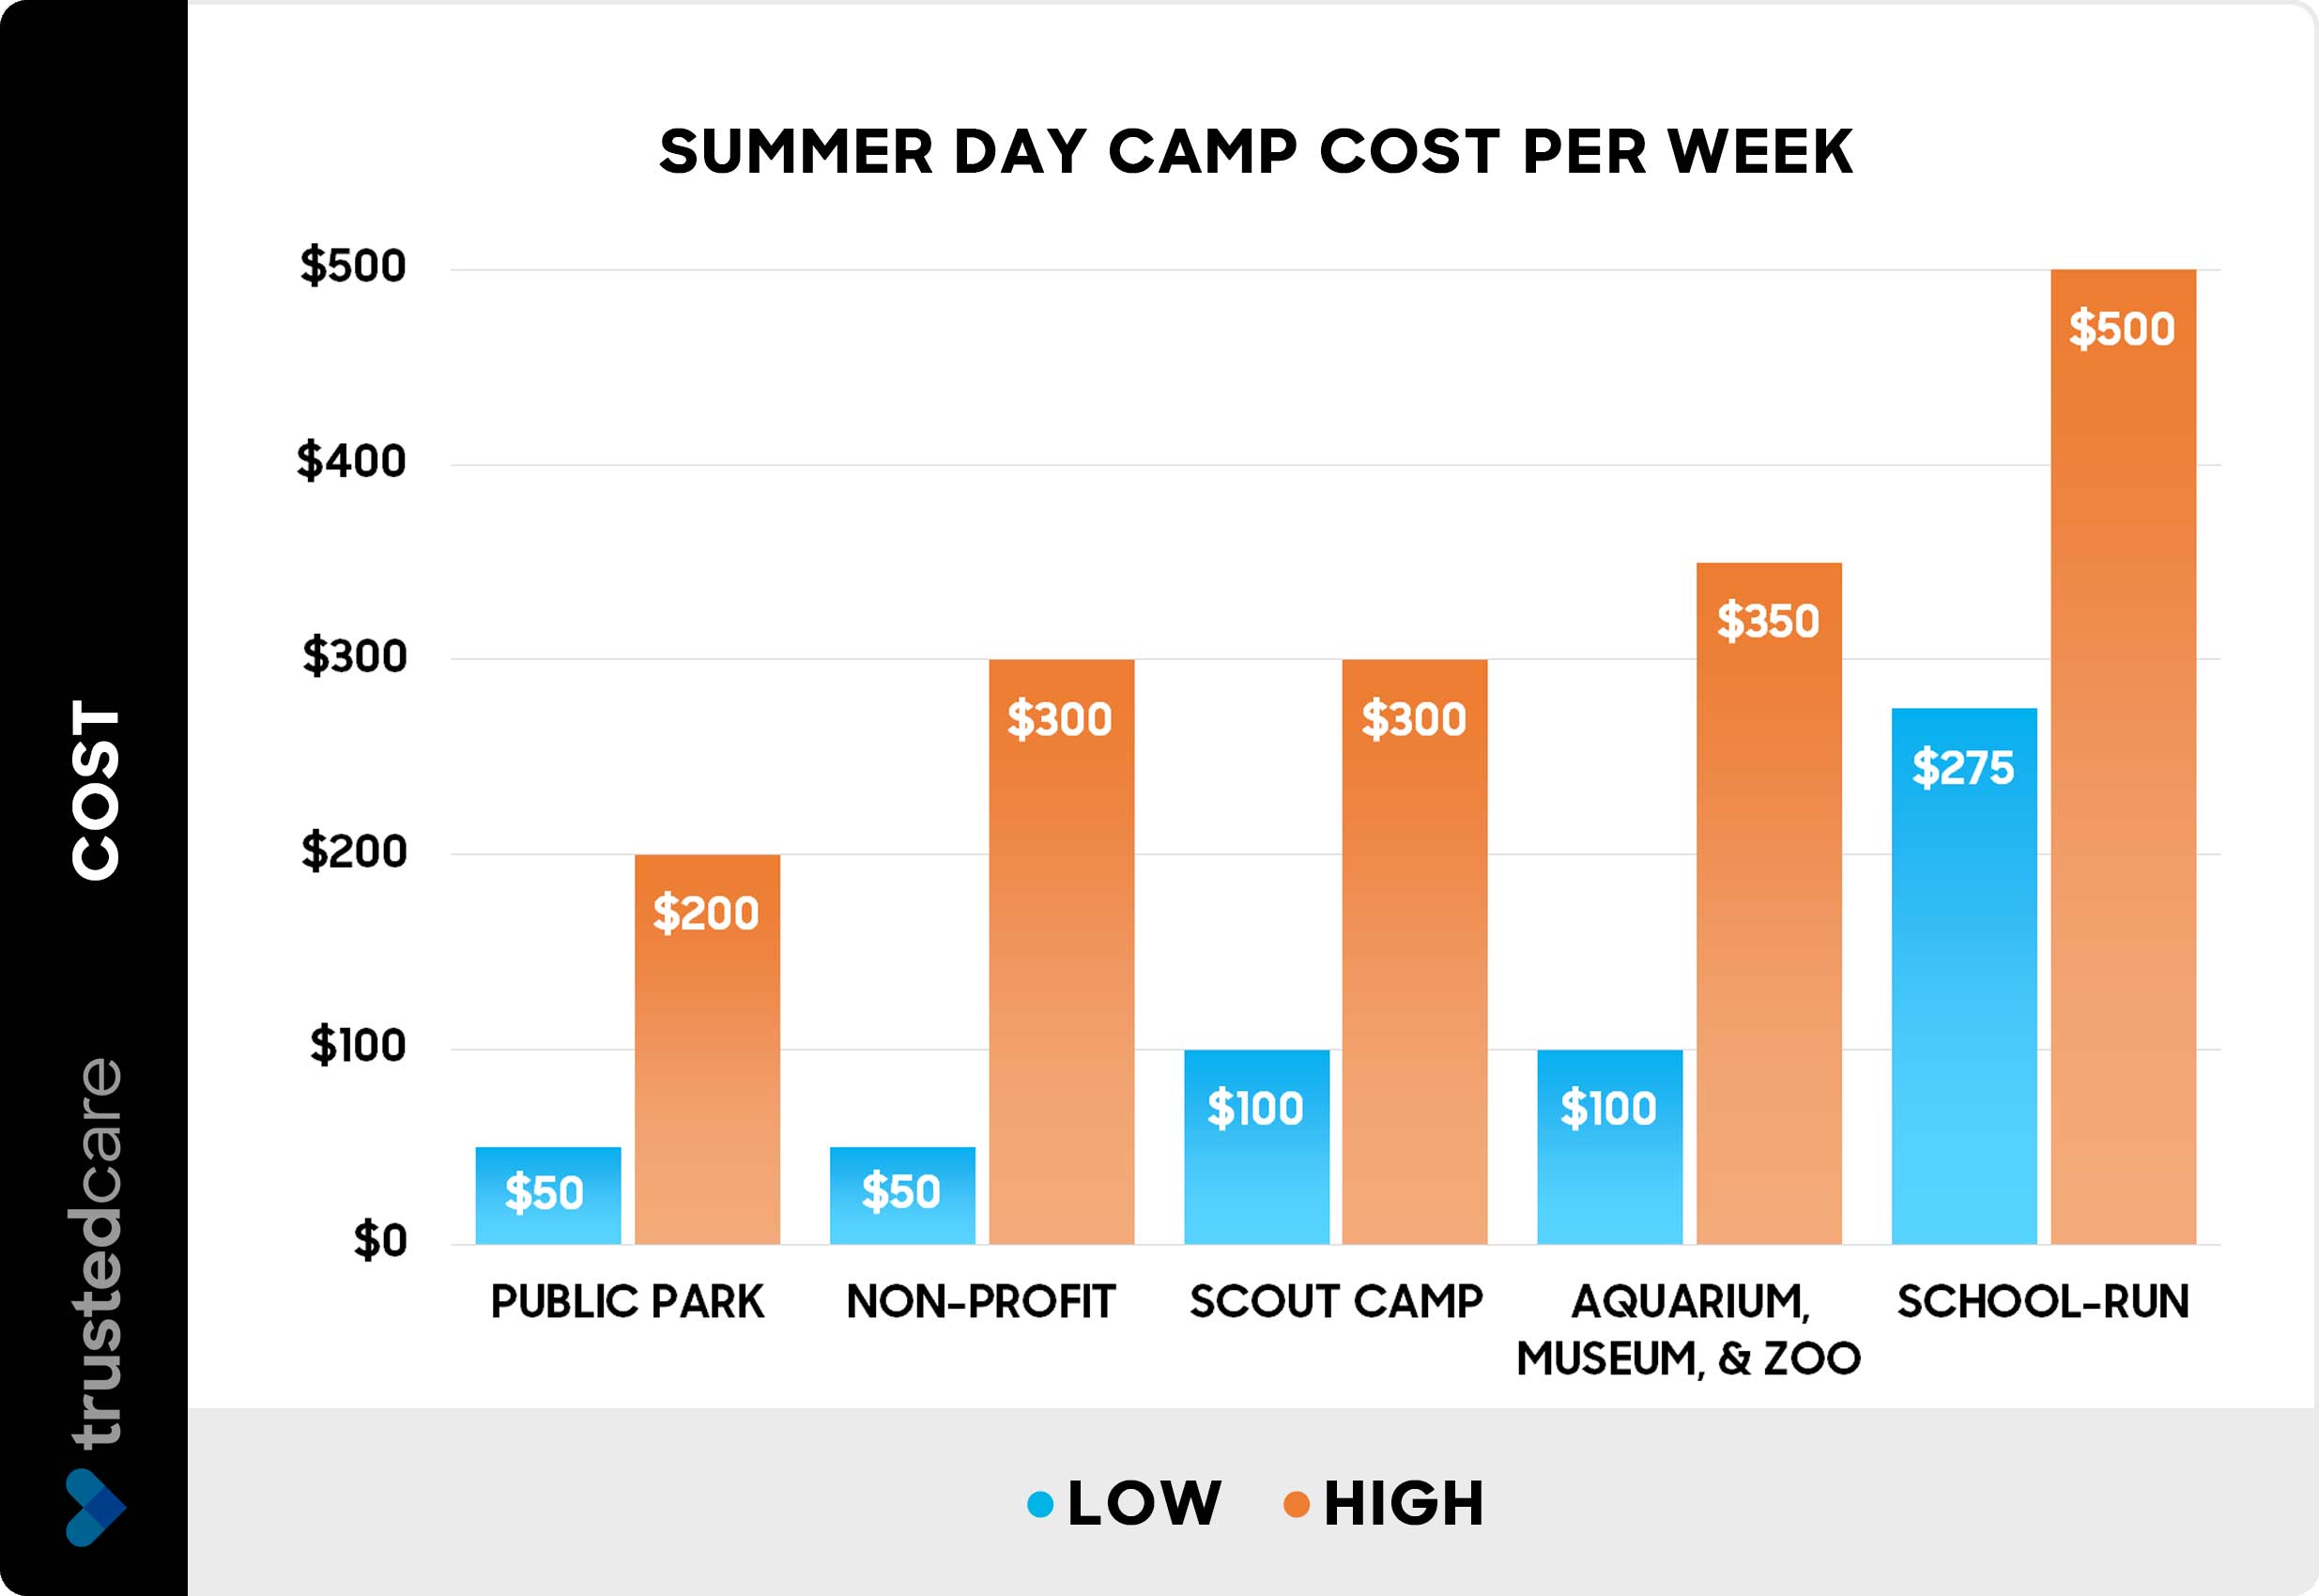 Summer day camp cost per week by type - Chart